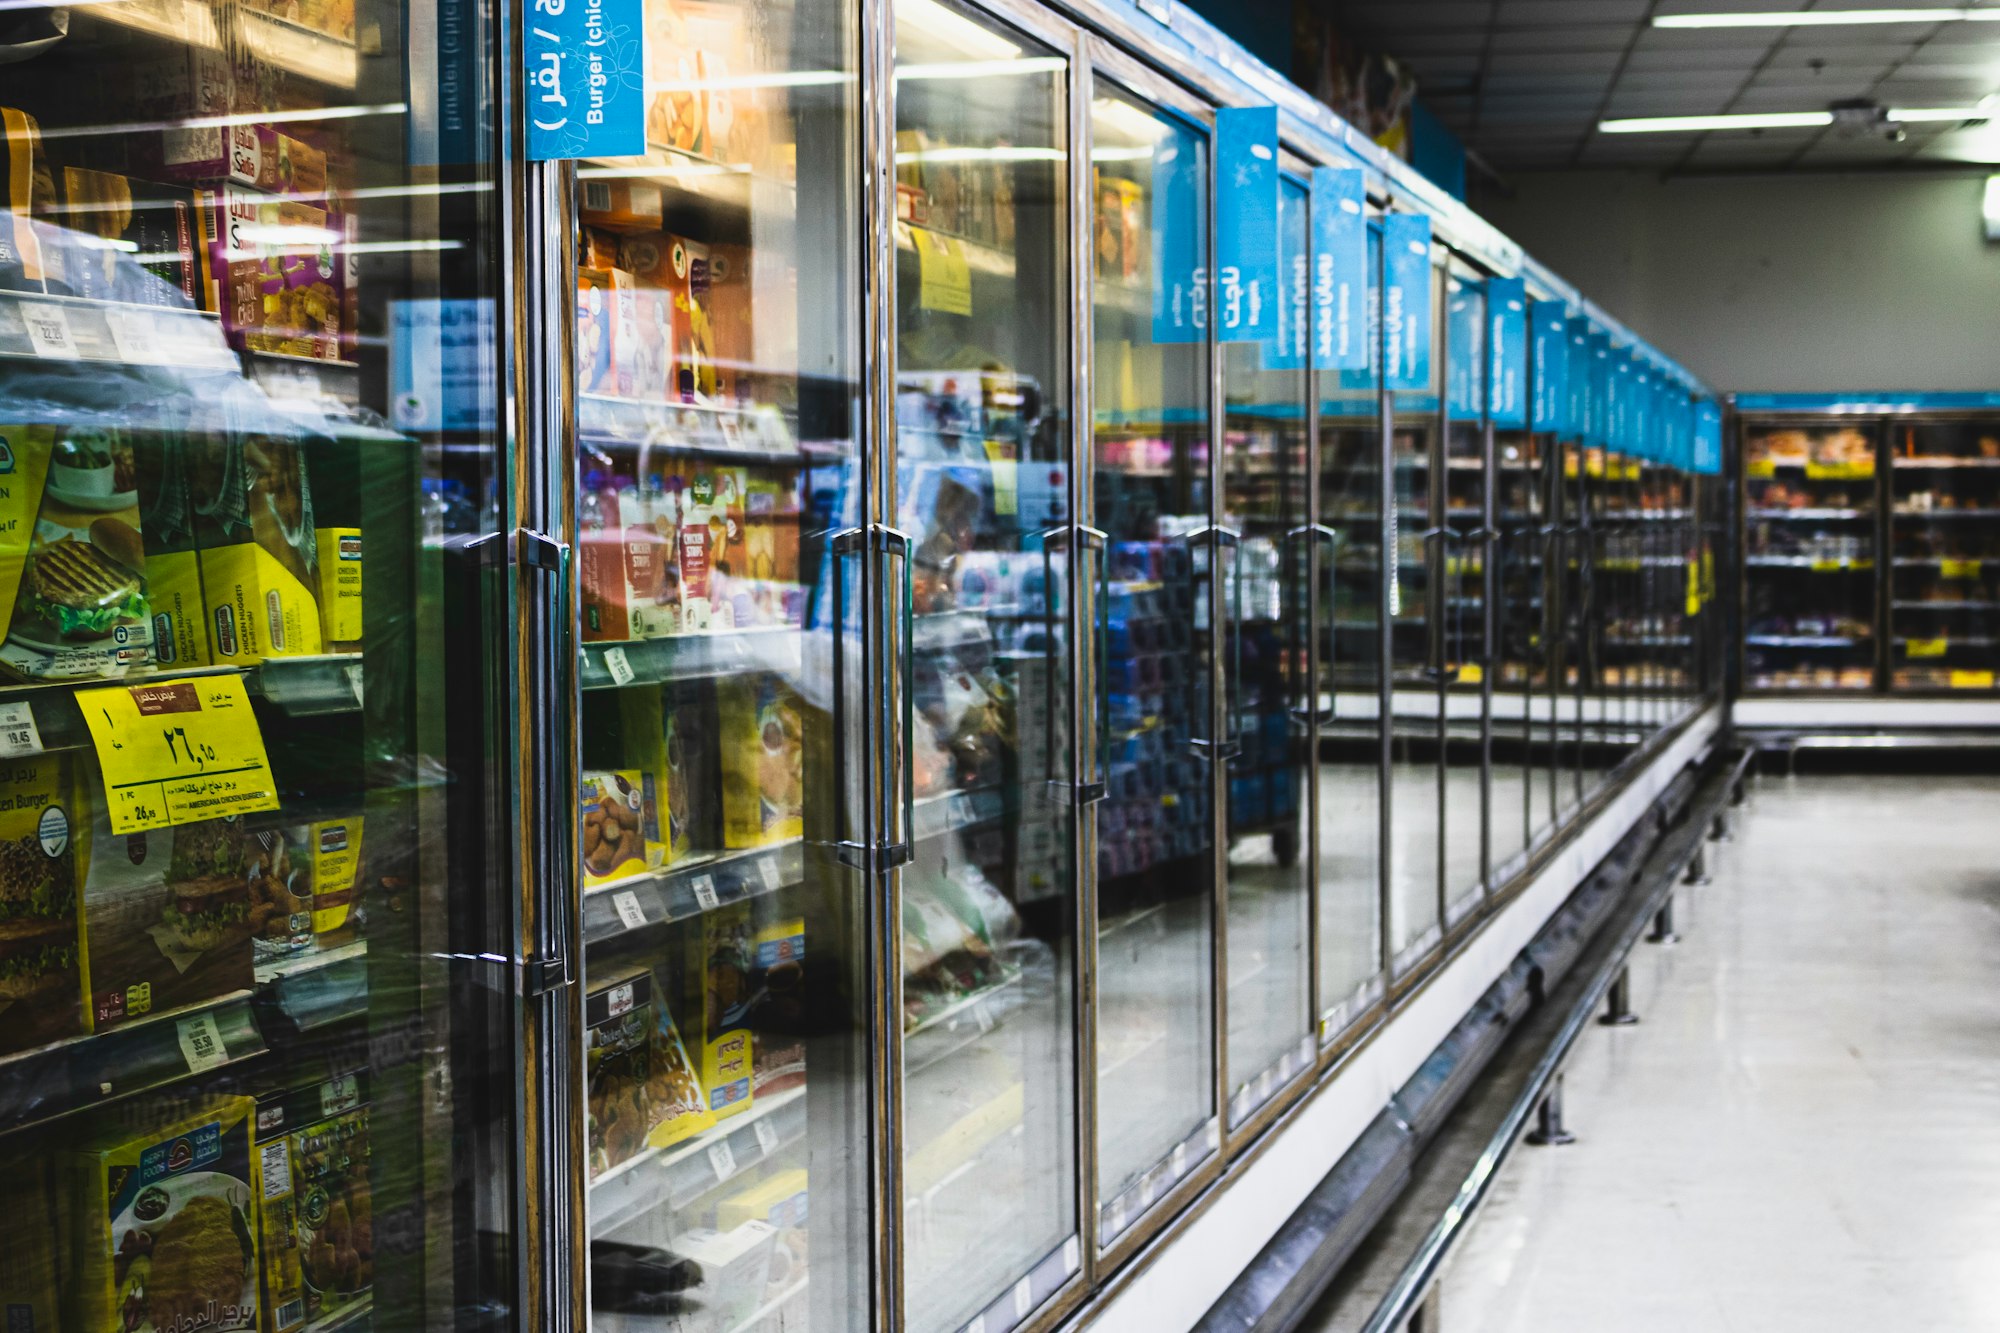 Facilio expands its smart buildings offerings to optimize energy usage in food retail